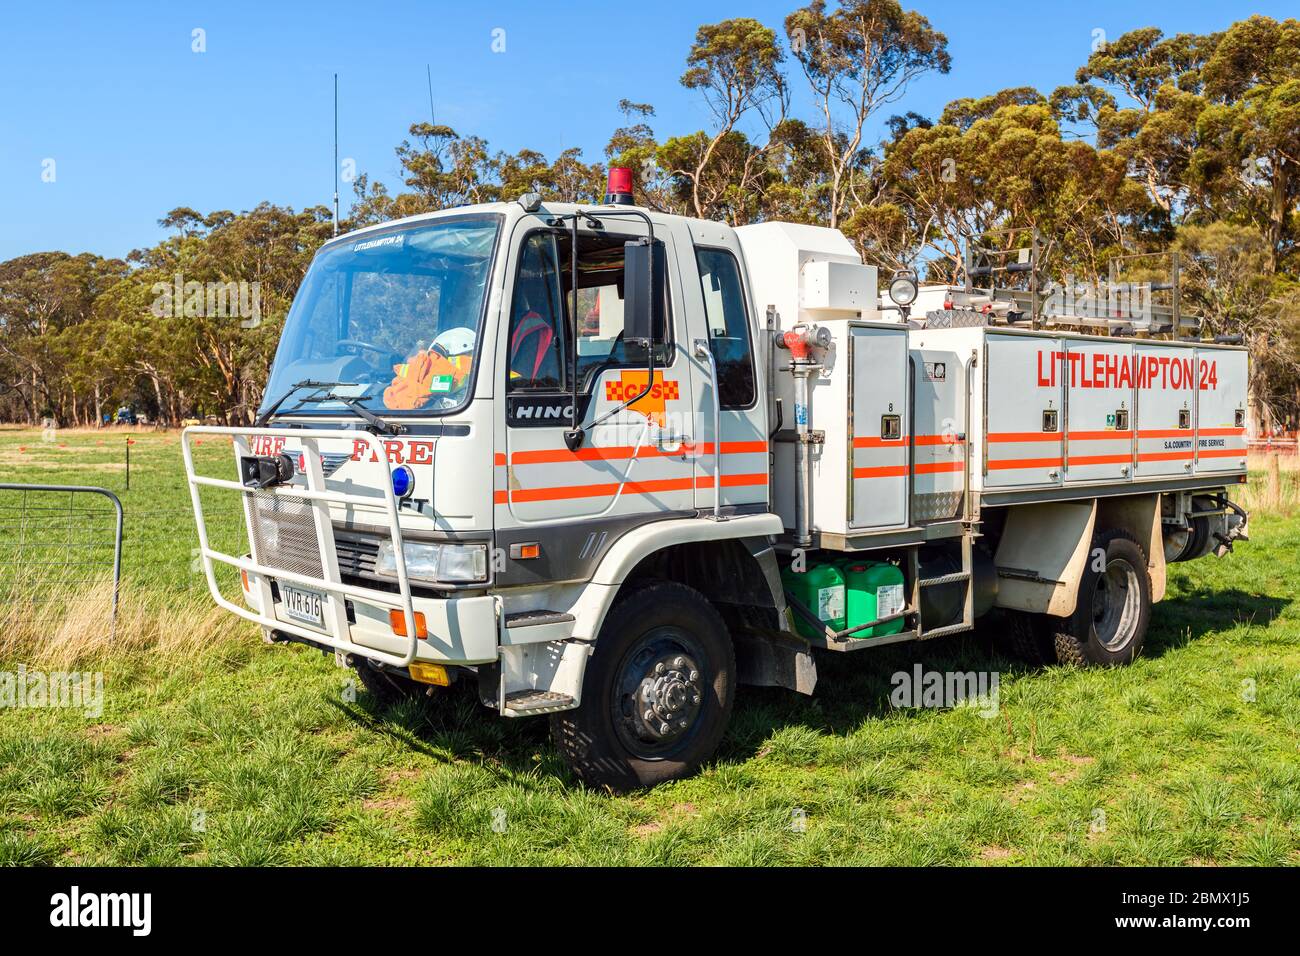 Adelaide Hills, South Australia - February 9, 2020: South Australian Country Fire Service truck parked on the green grass on a bright warm summer day Stock Photo